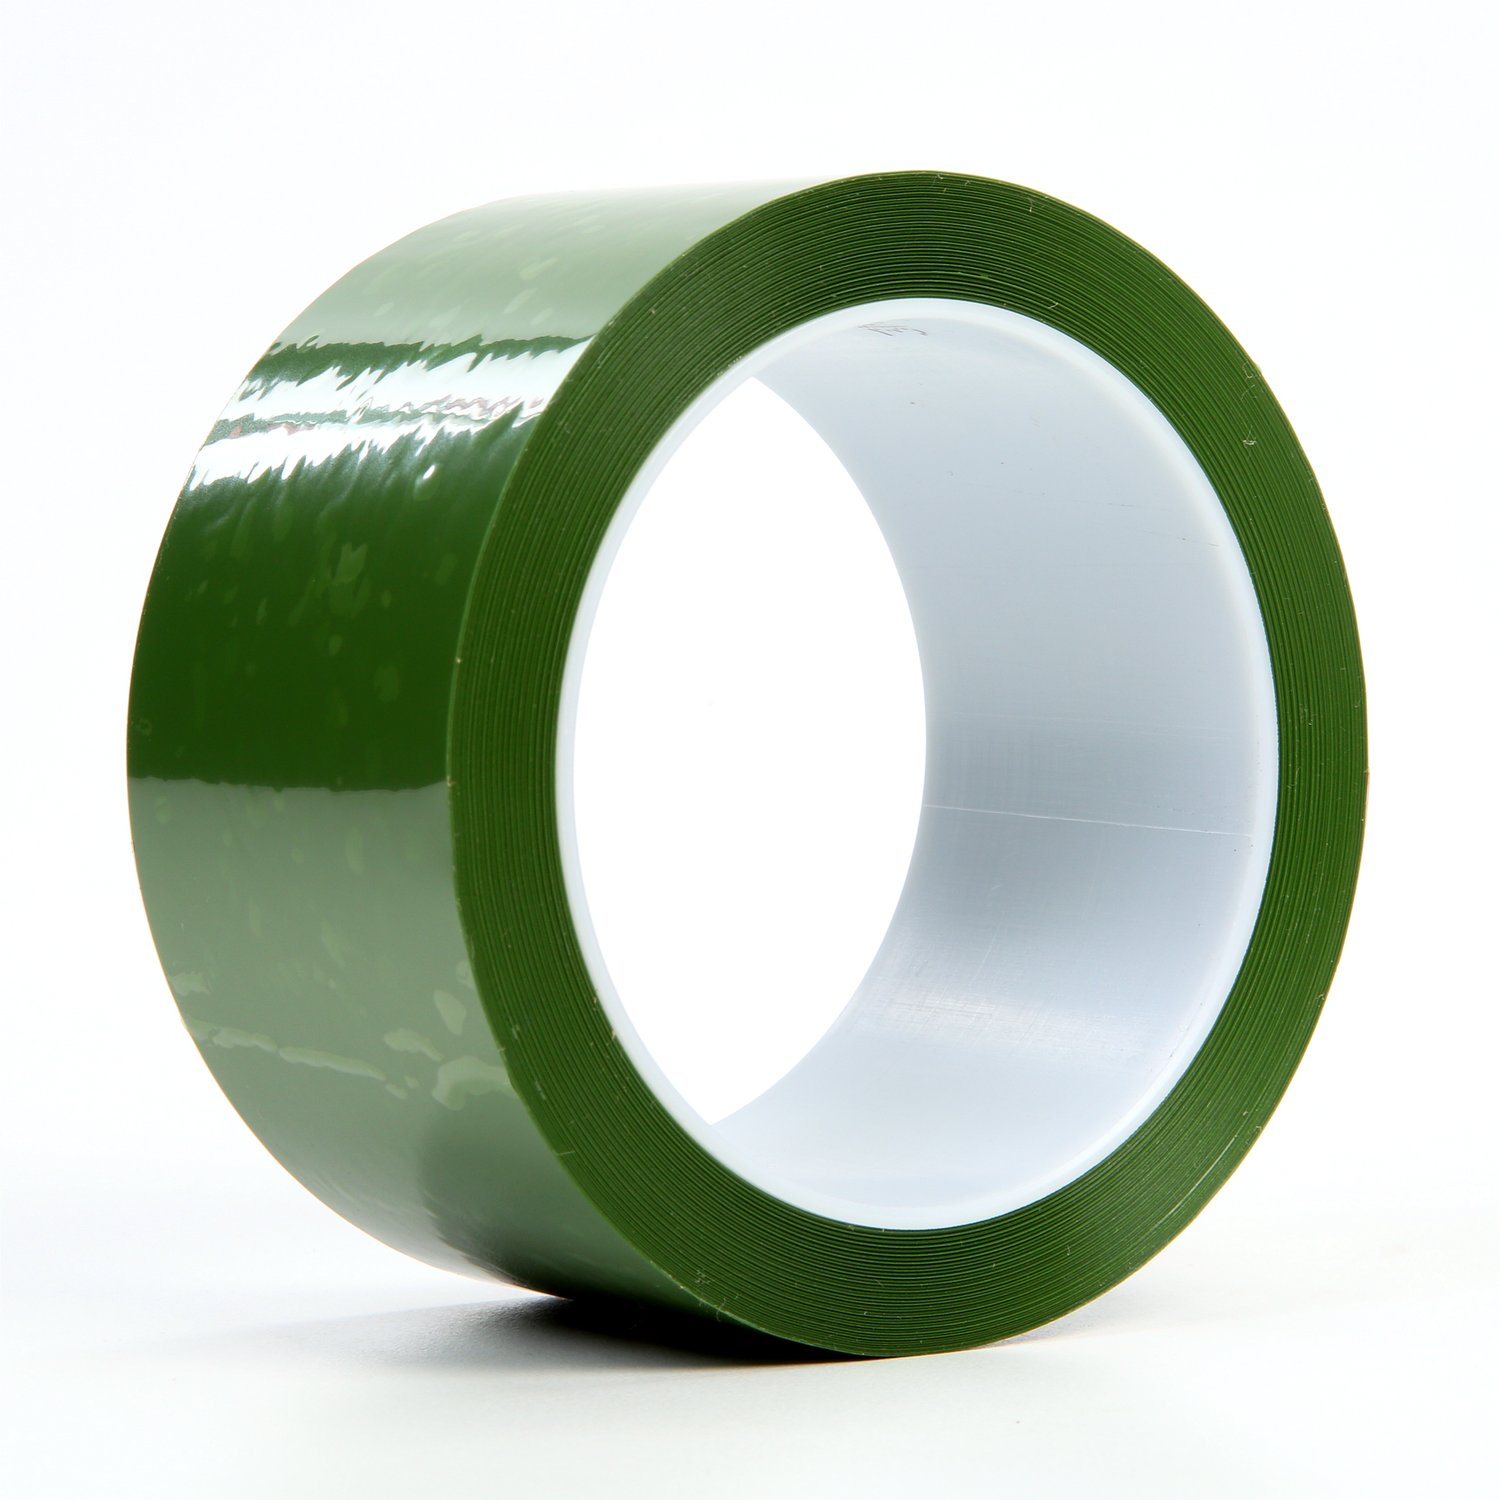 7000048553 - 3M Polyester Tape 8402, Green, 1.9 mil, 2 in x 72 yd, 24 rolls per case